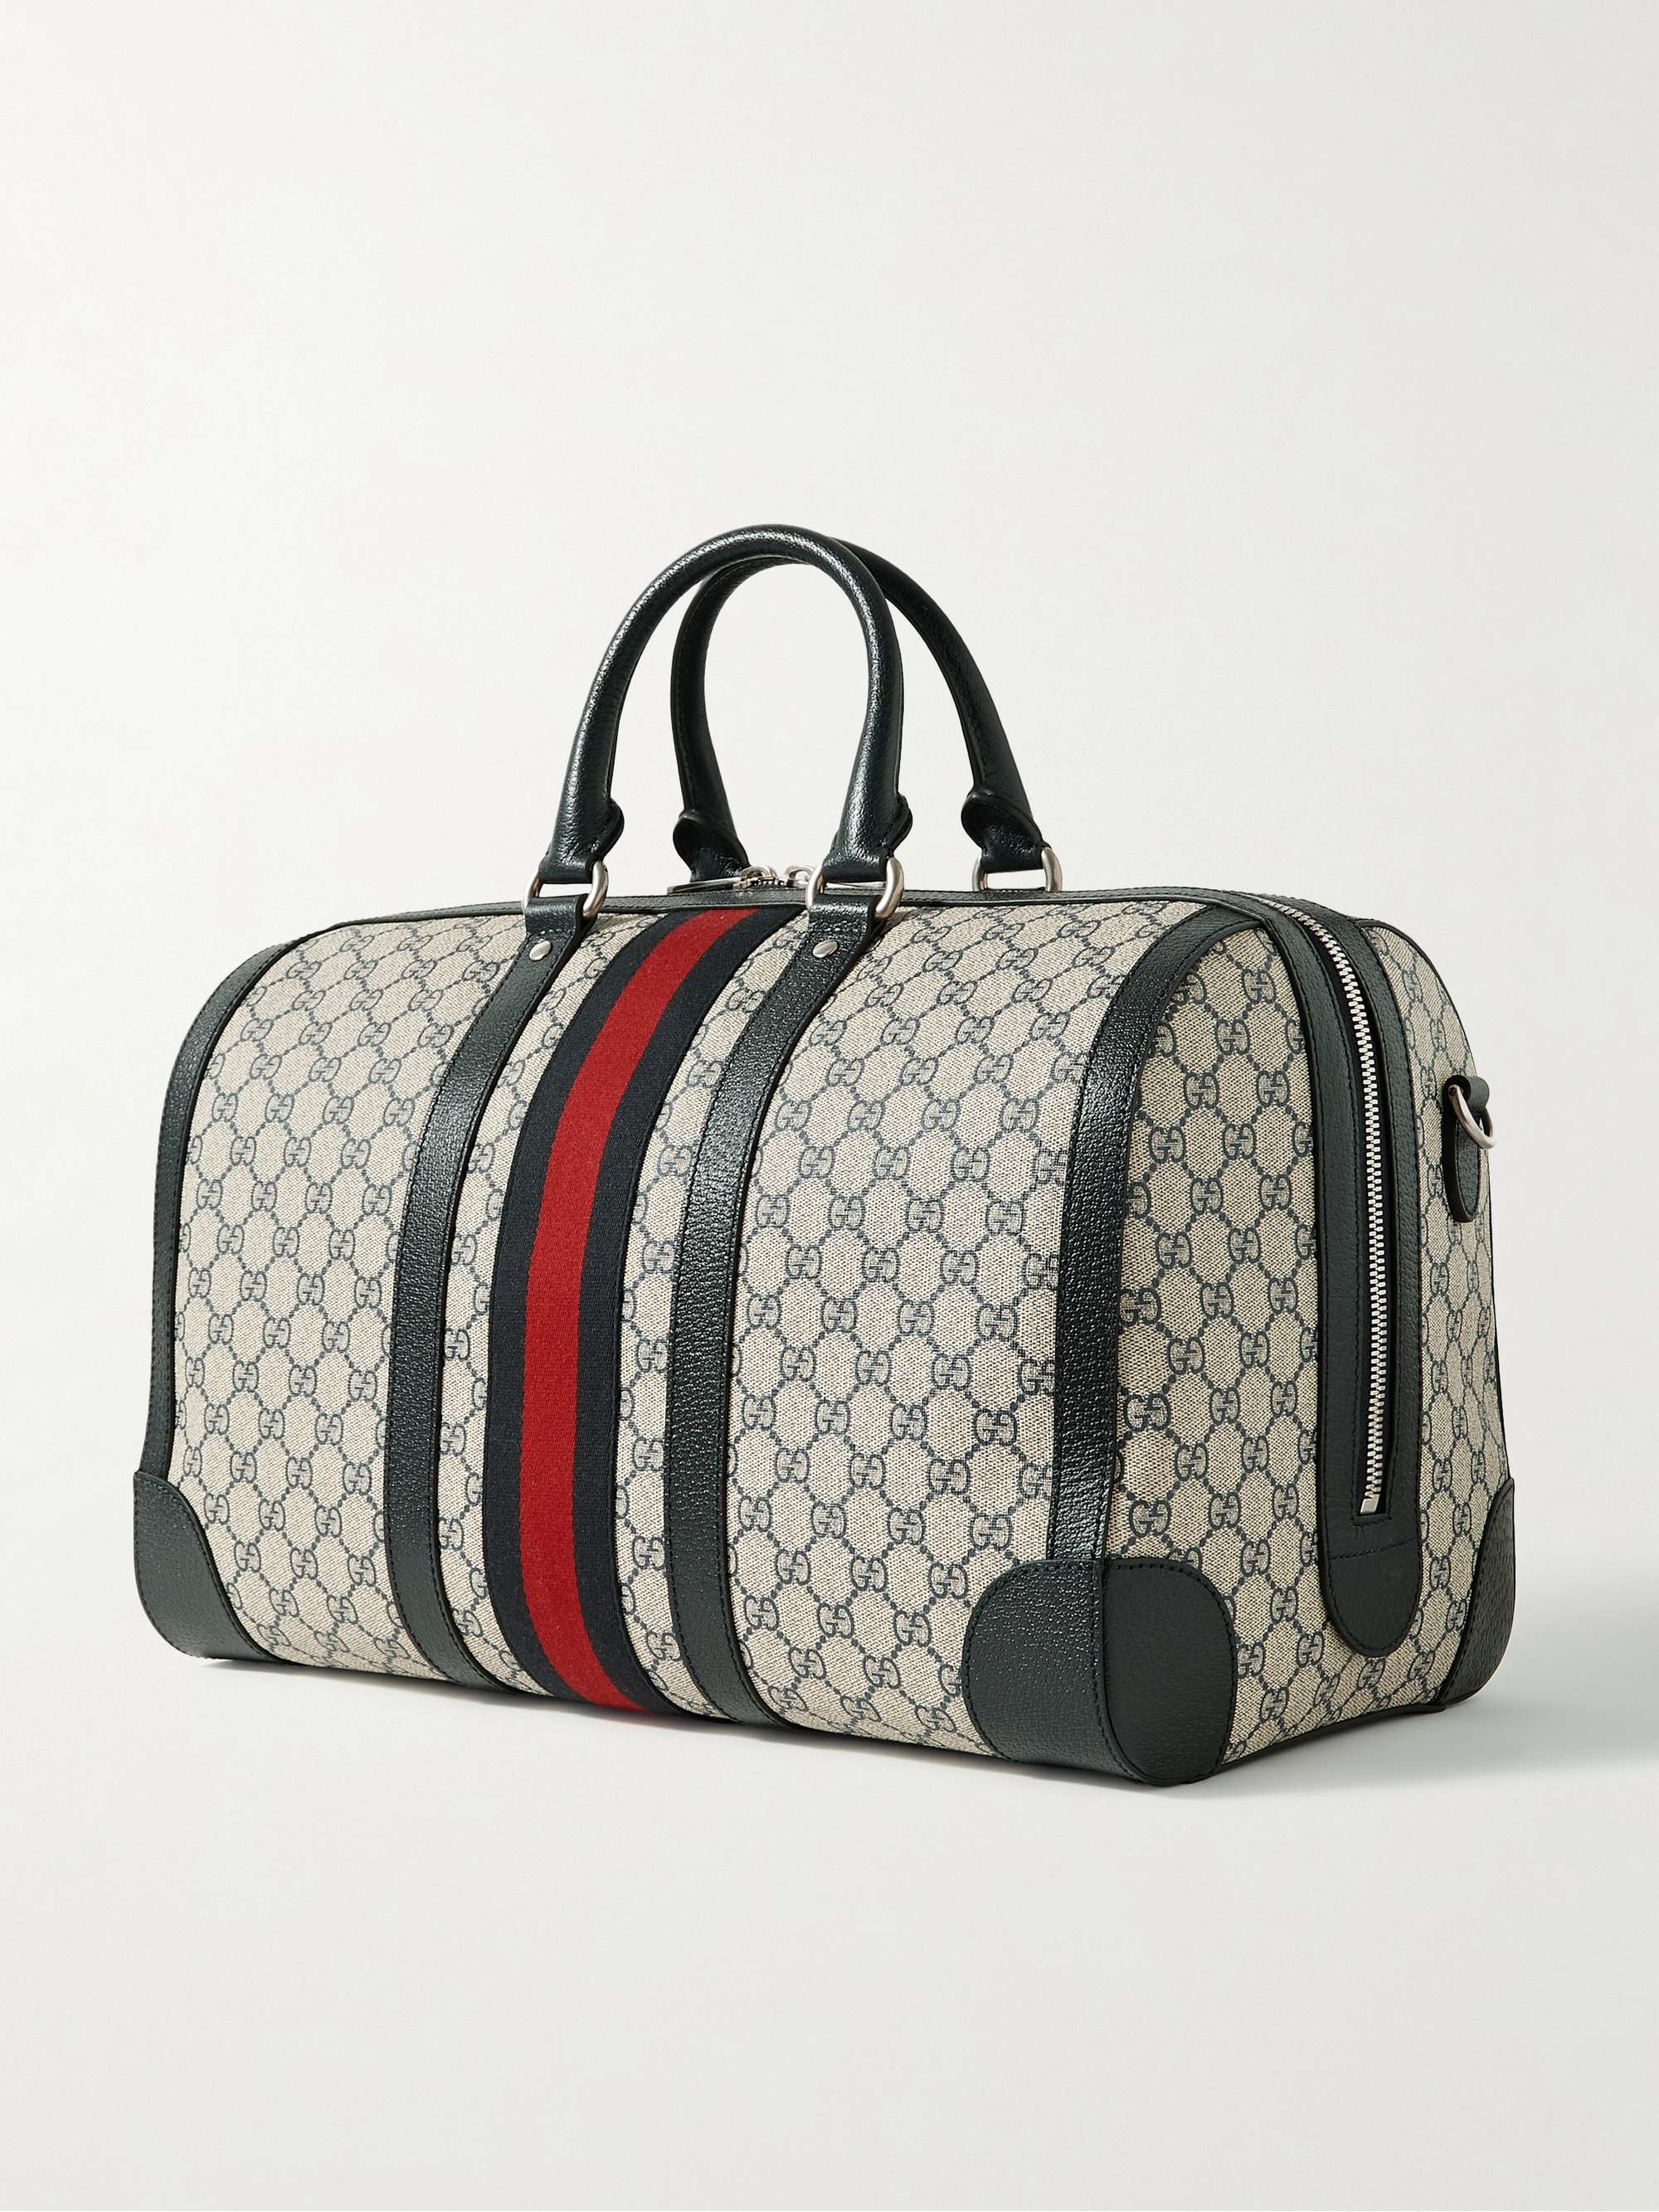 GUCCI Leather- and Webbing-Trimmed Monogrammed Supreme Coated-Canvas Duffle Bag